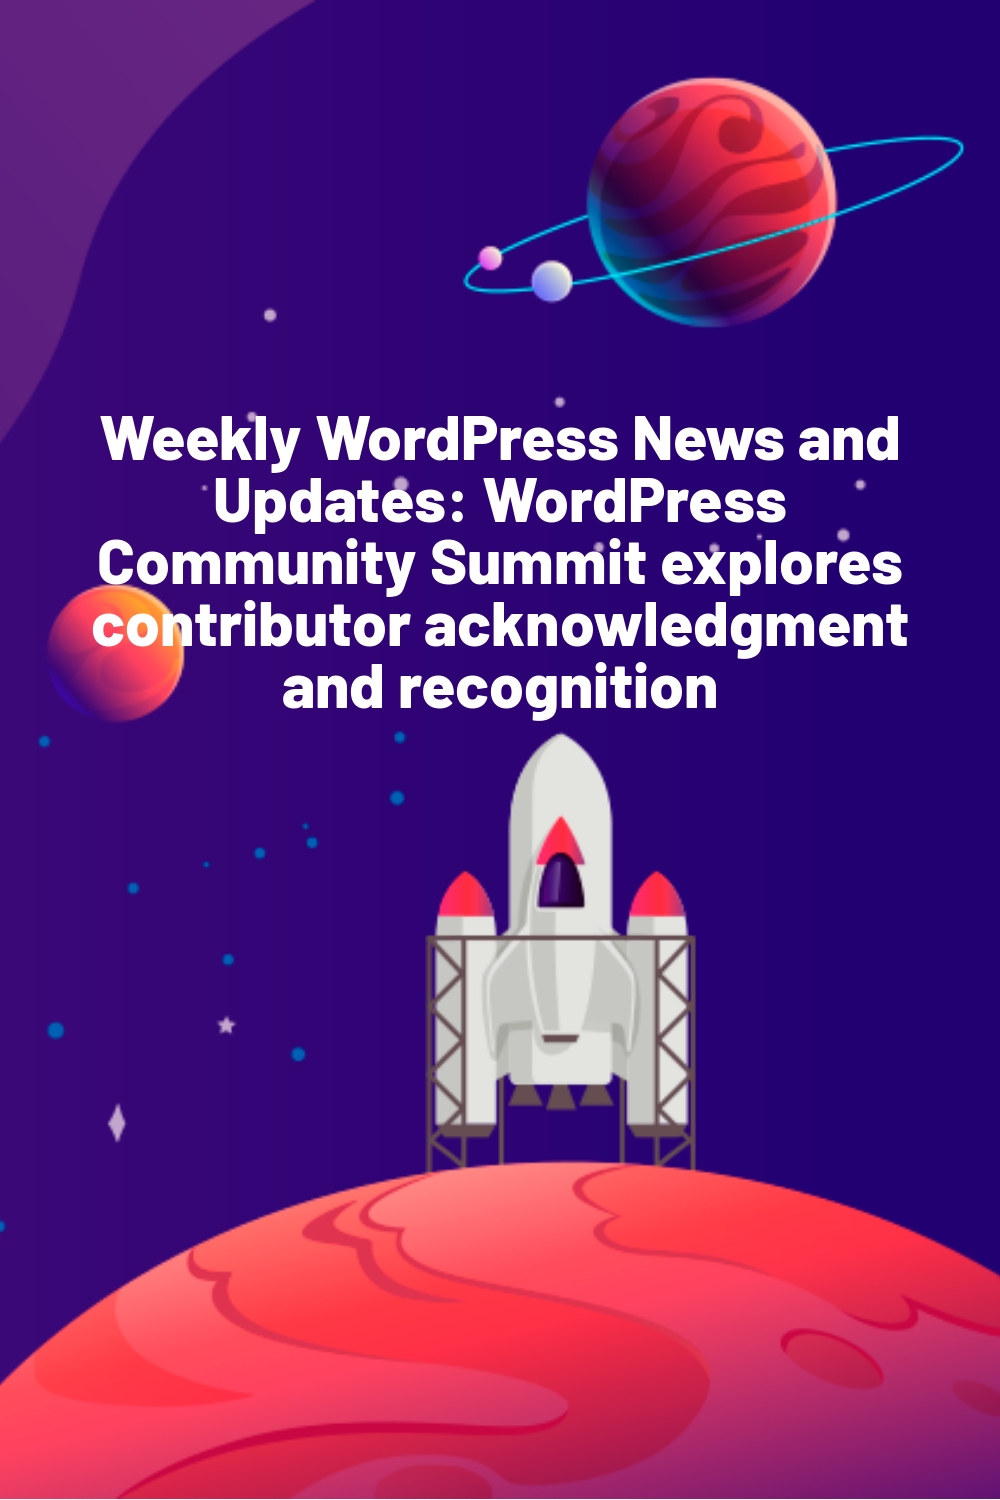 Weekly WordPress News and Updates: WordPress Community Summit explores contributor acknowledgment and recognition